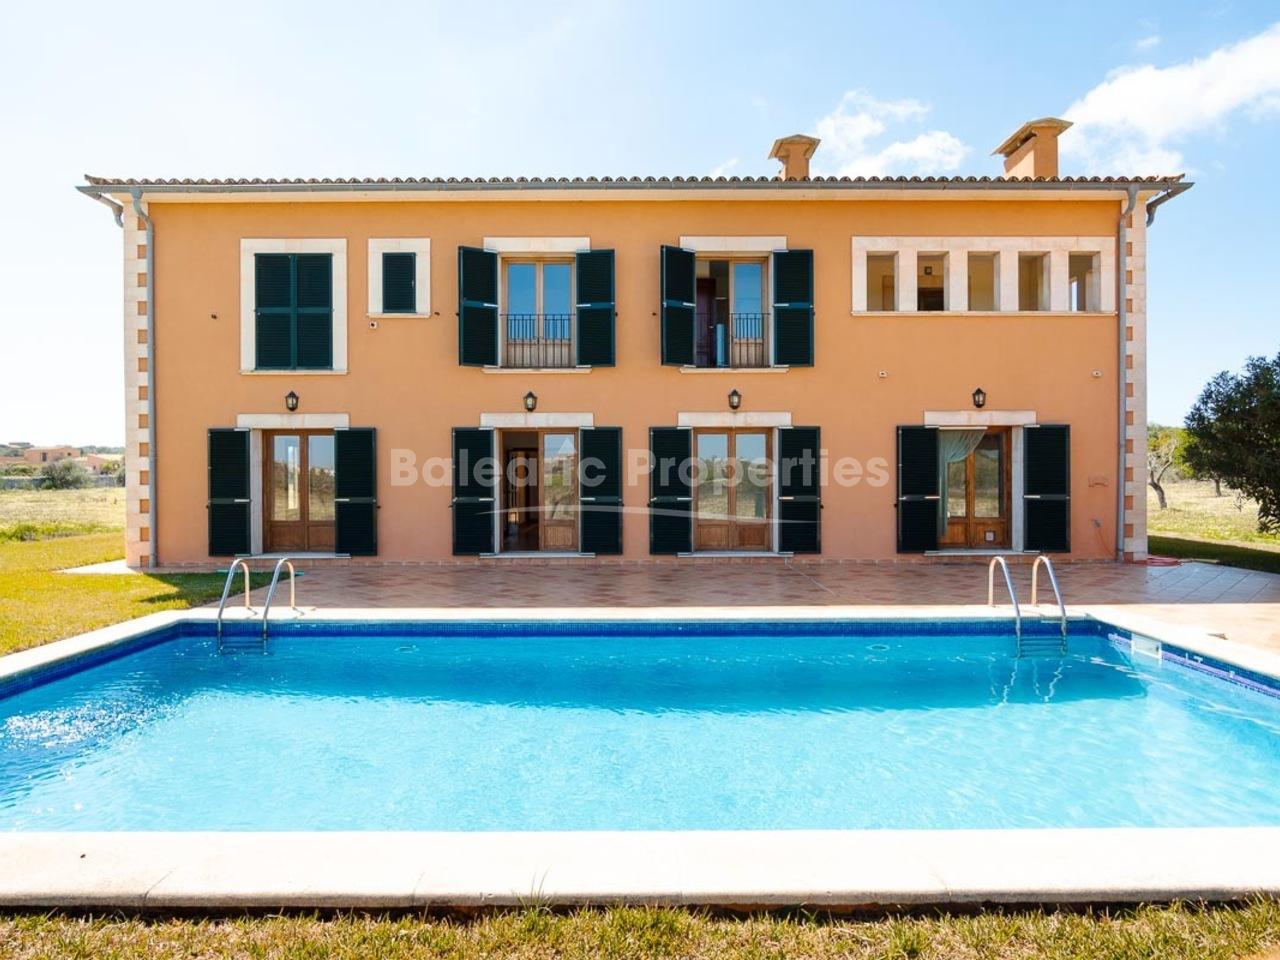 Spacious finca with pool and panoramic views for sale in Santanyí, Mallorca